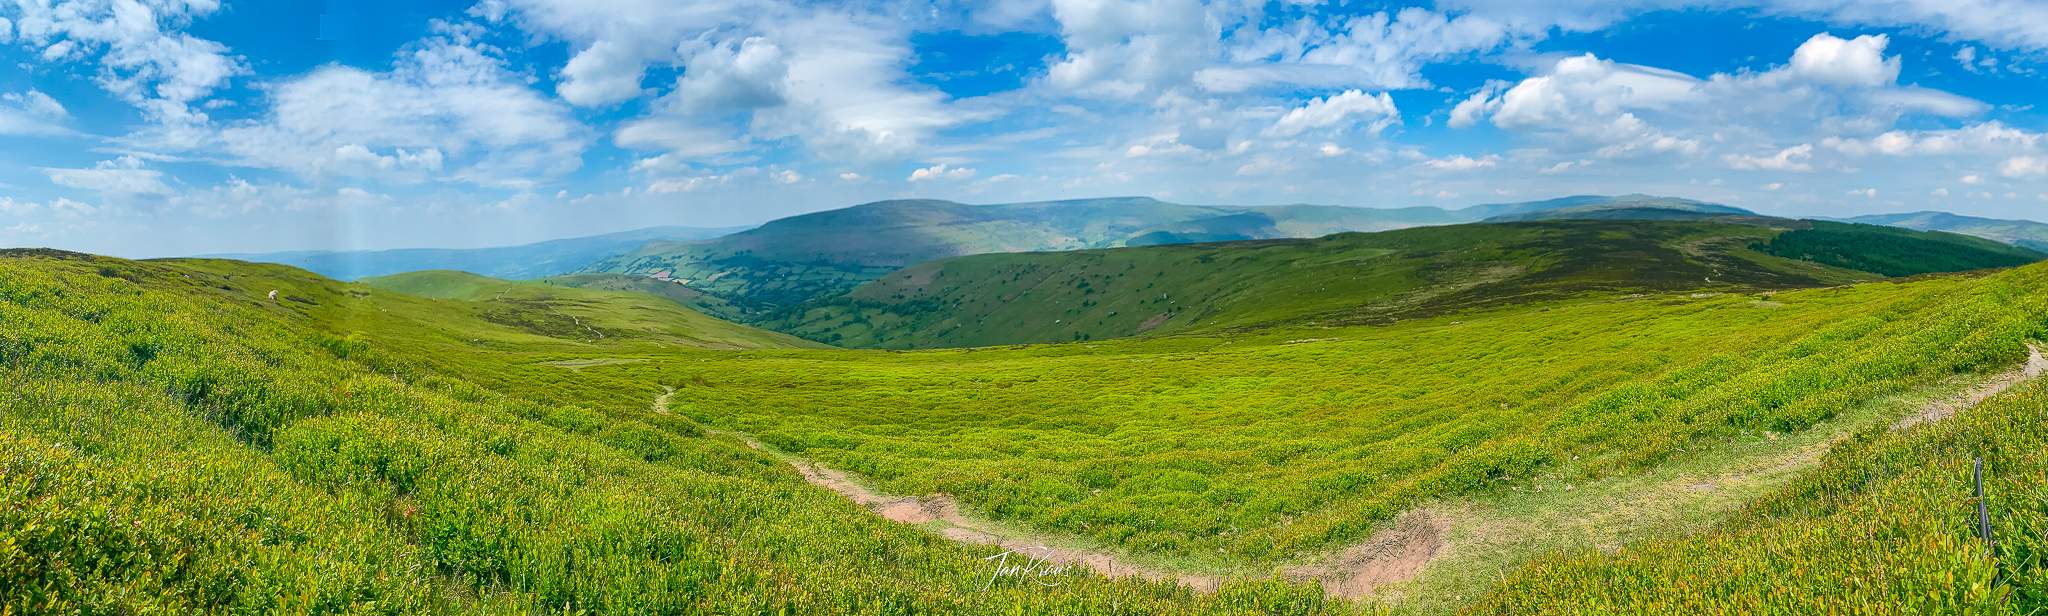 Panoramic view from the hills, Day 2 of The Beacons Way, Wales, UK